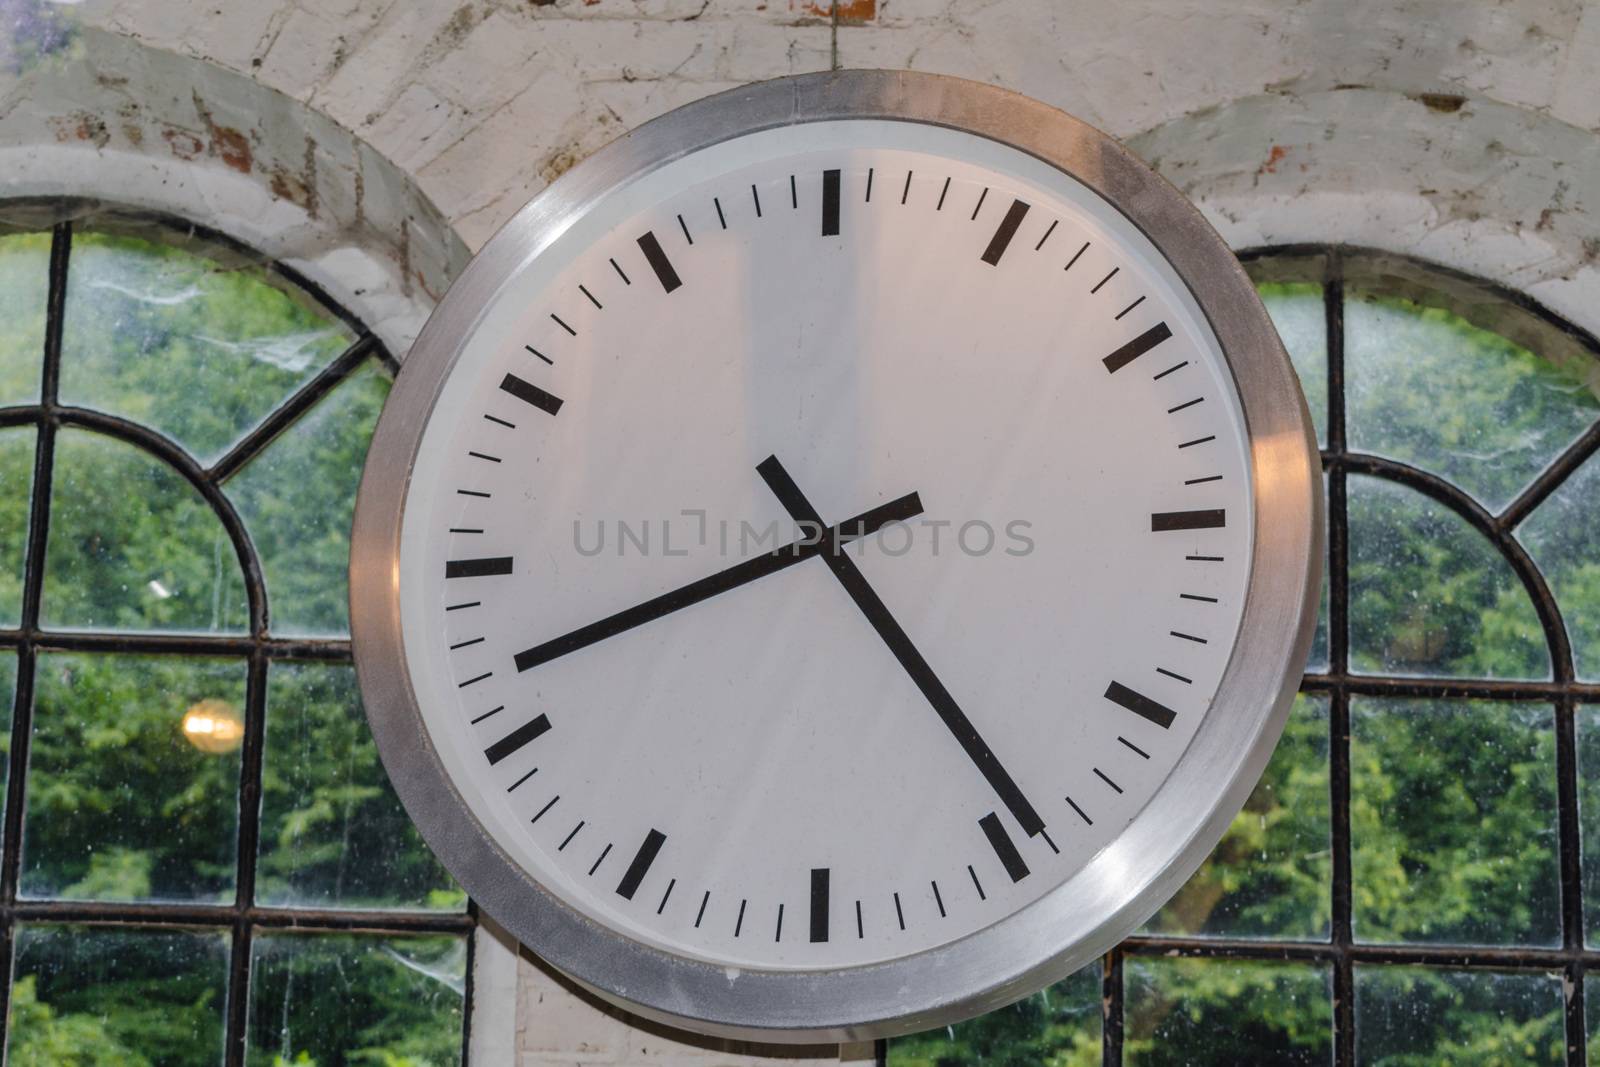 Large clock in front of the window in an industrial factory on a brick wall.